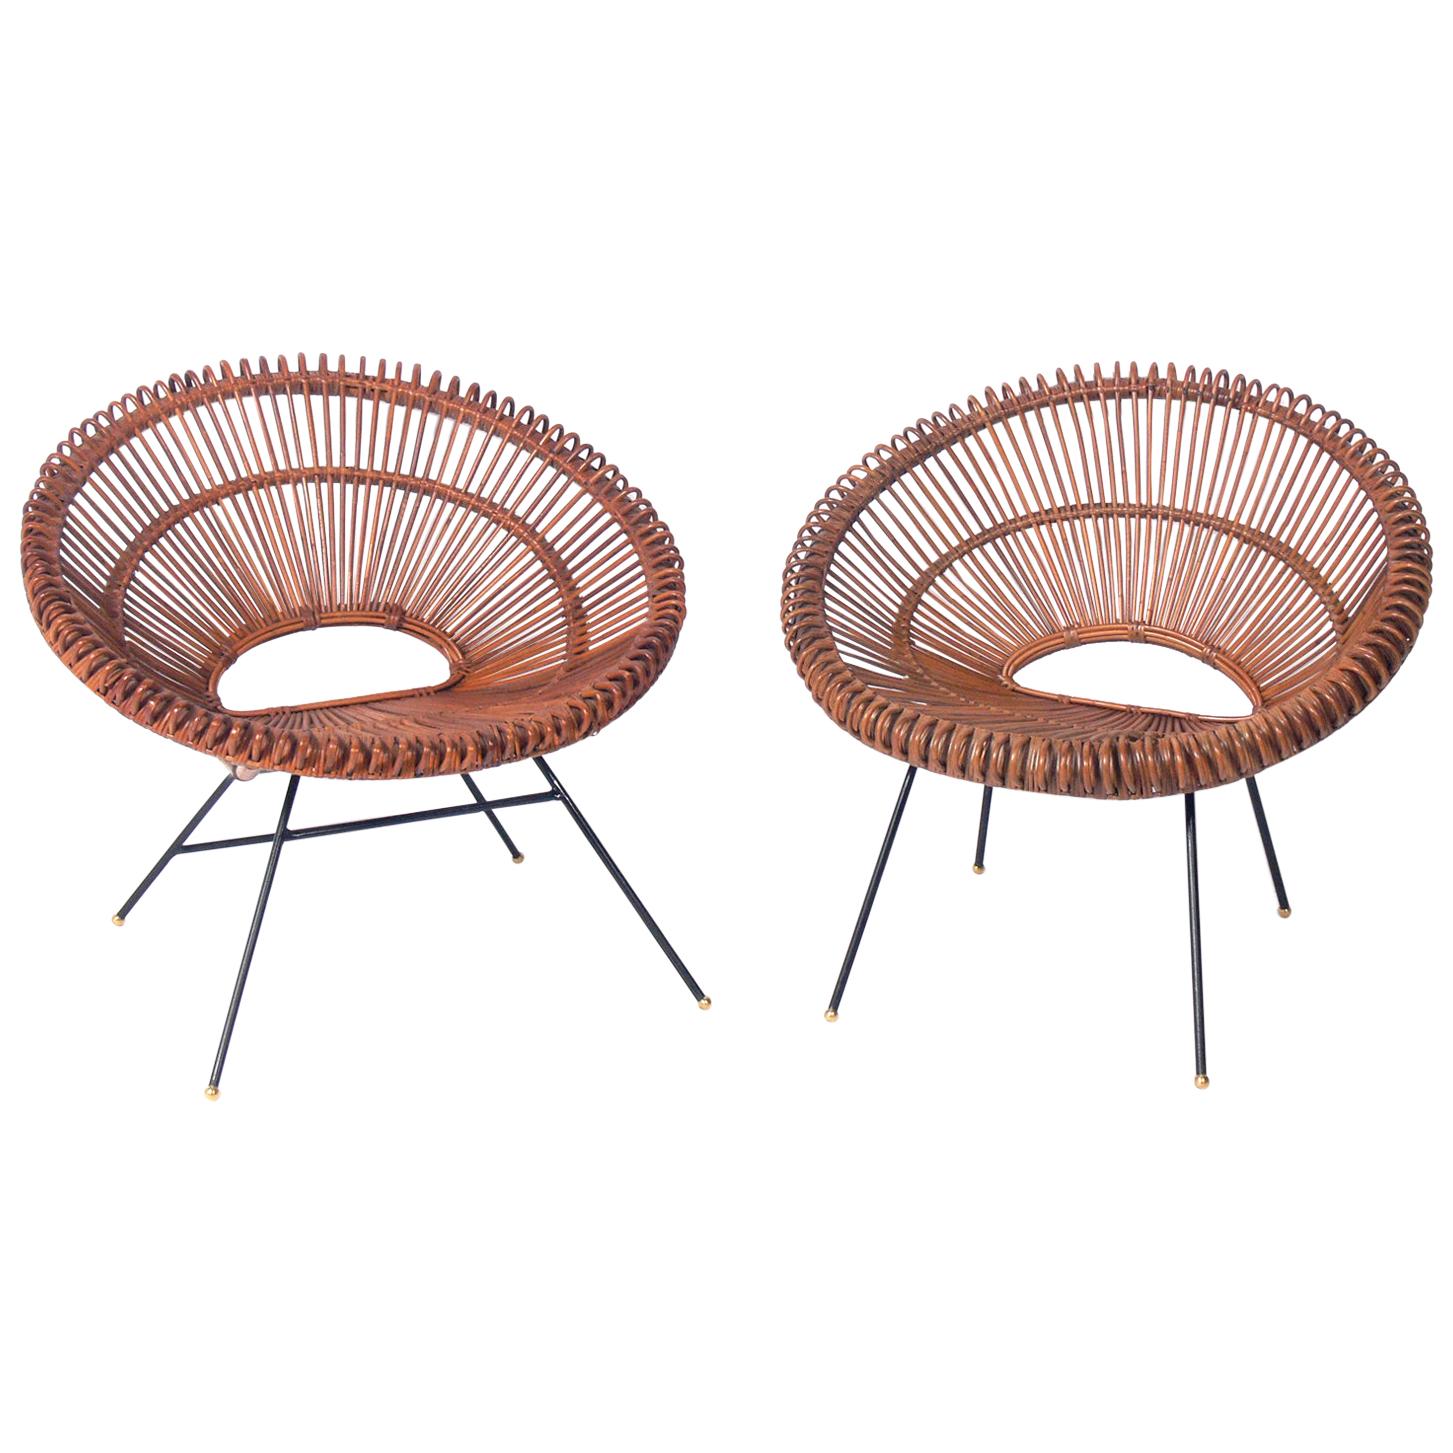 Sculptural French Rattan and Iron Chairs by Dirk Jan Rol